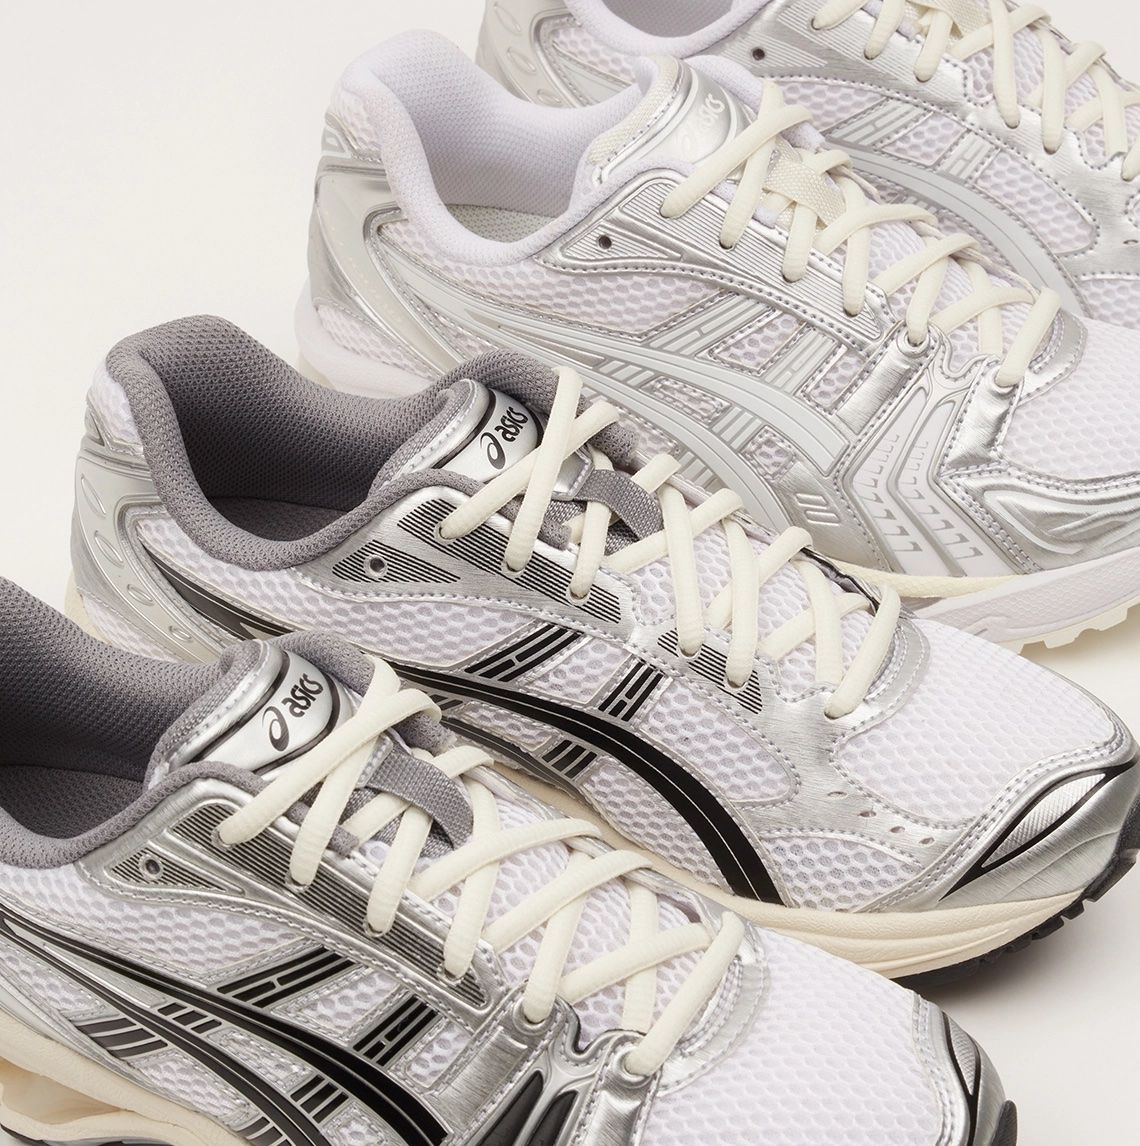 farvestof Jonglere harpun Asics Sneakers Are Everywhere, But Why Now? We Found Out